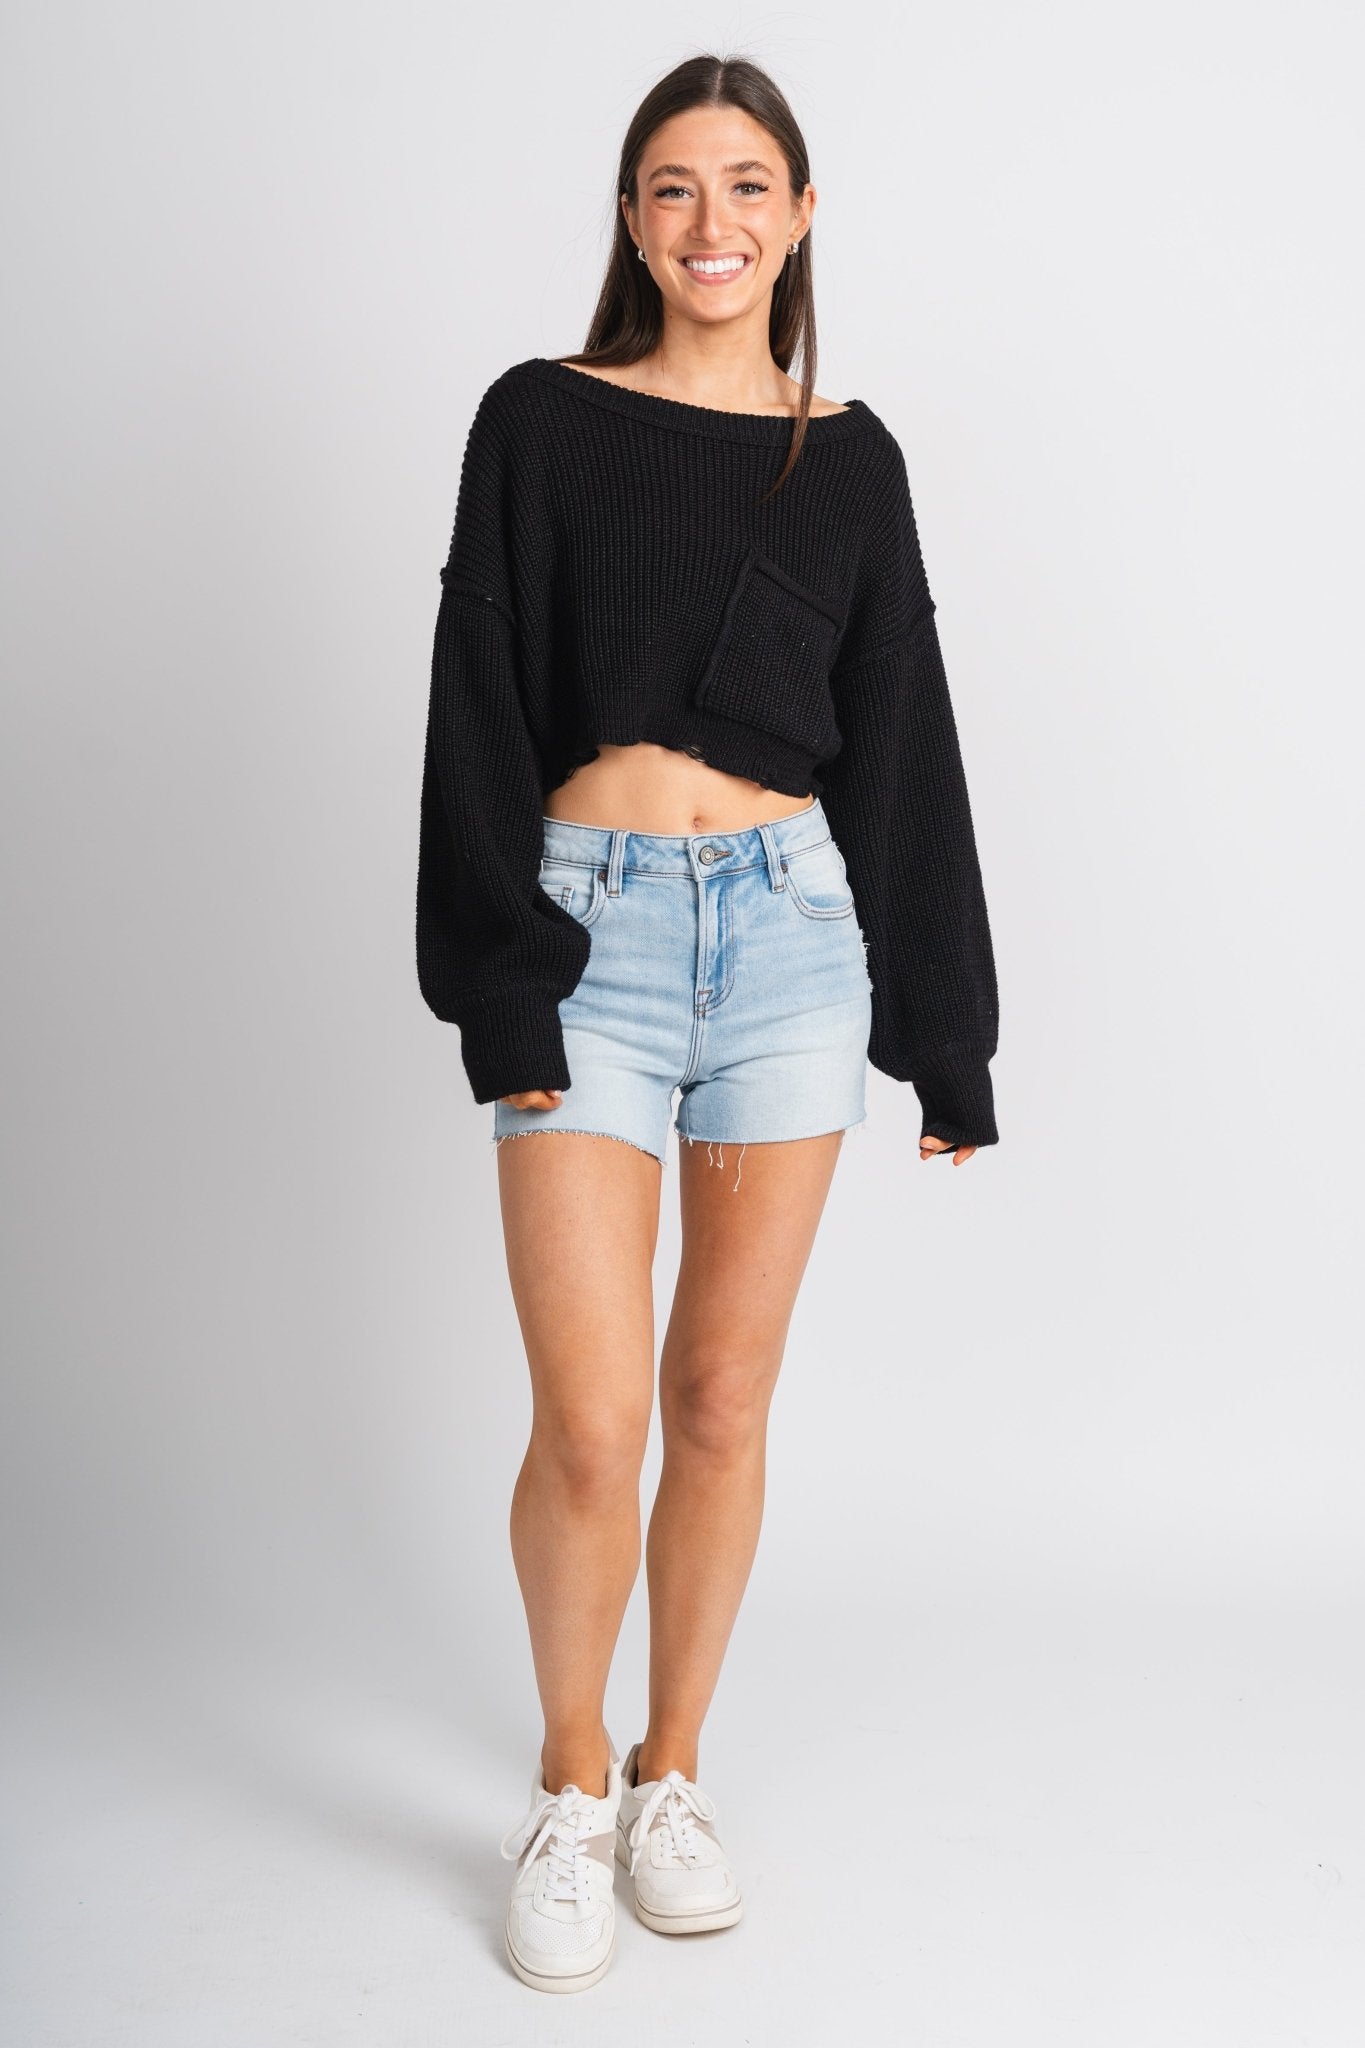 Distressed crop sweater black - Trendy Sweaters | Cute Pullover Sweaters at Lush Fashion Lounge Boutique in Oklahoma City